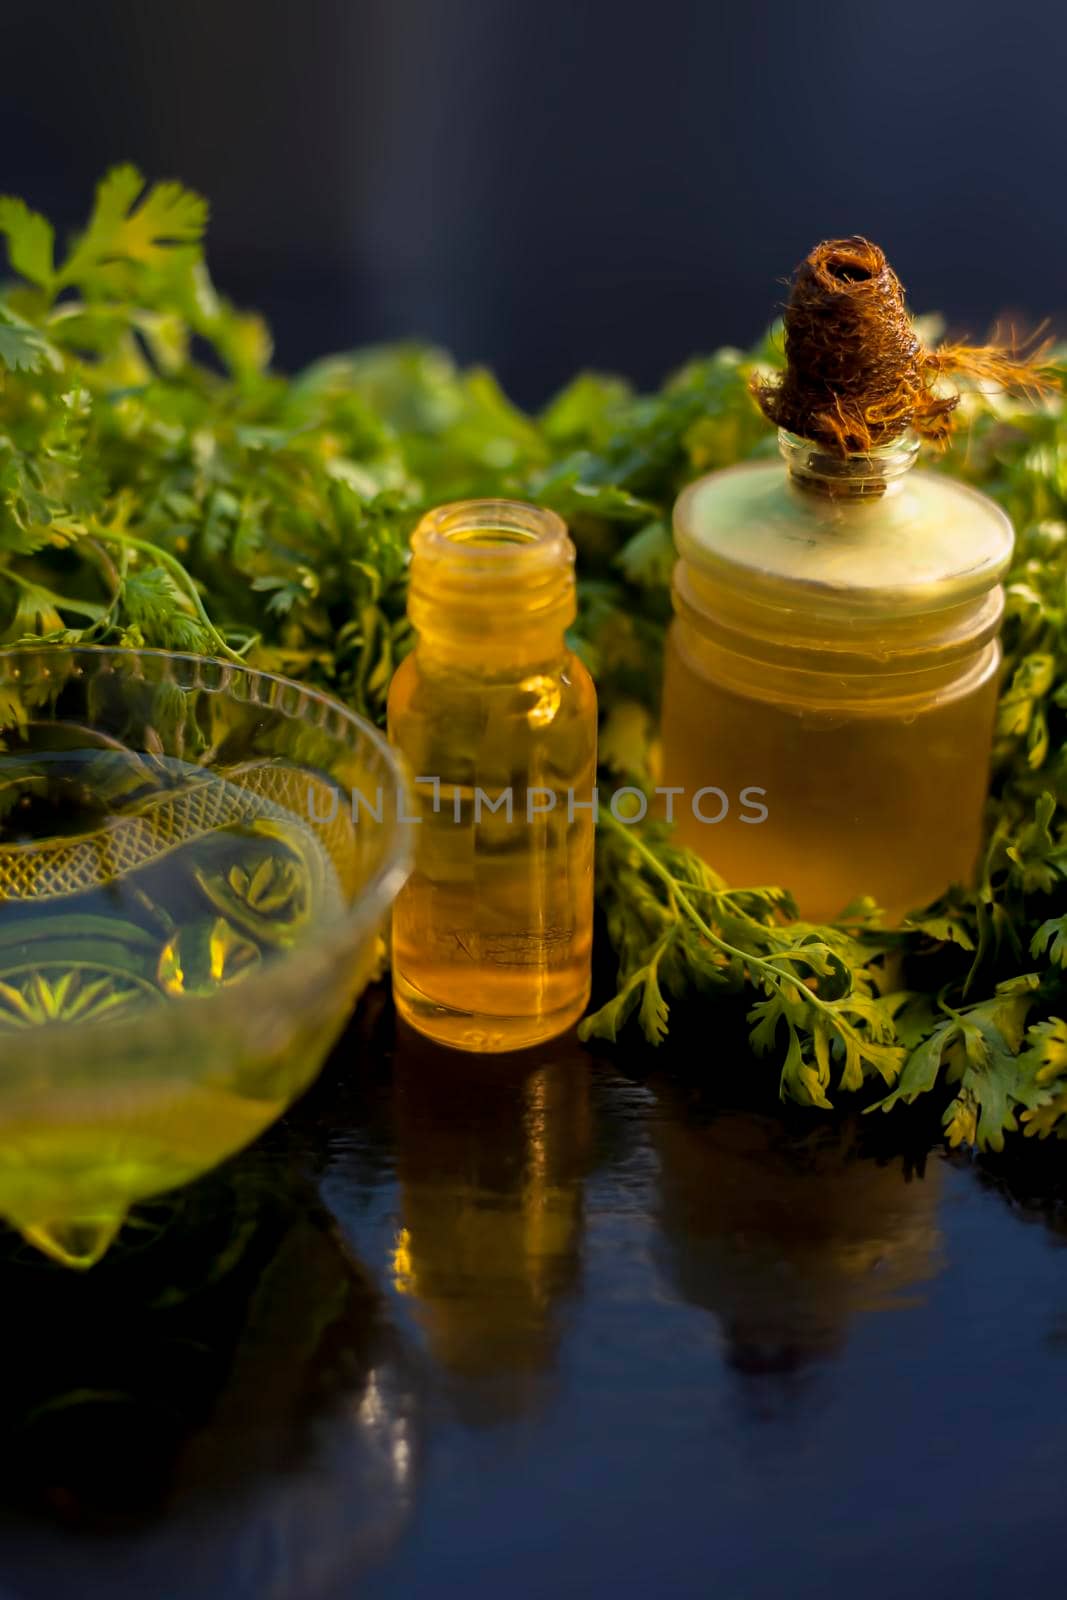 Close up shot of fresh cilantro leaves along with its tea, oil and essential oil in a different bottle on the black glossy surface. Vertical shot.